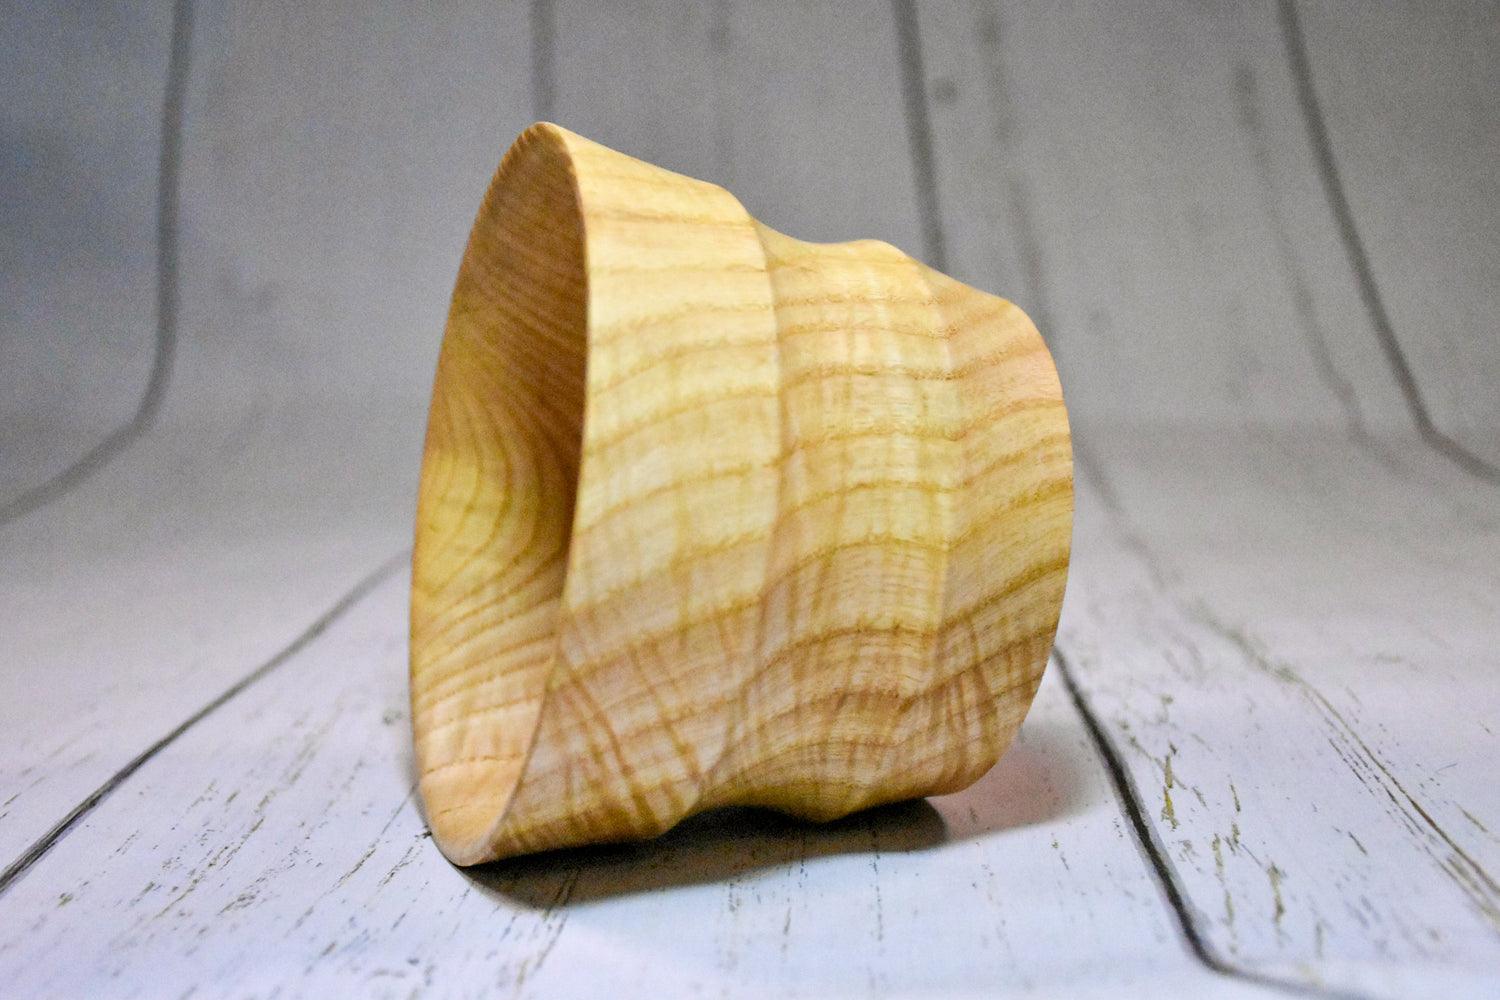 A hand-turned bowl laying on its side